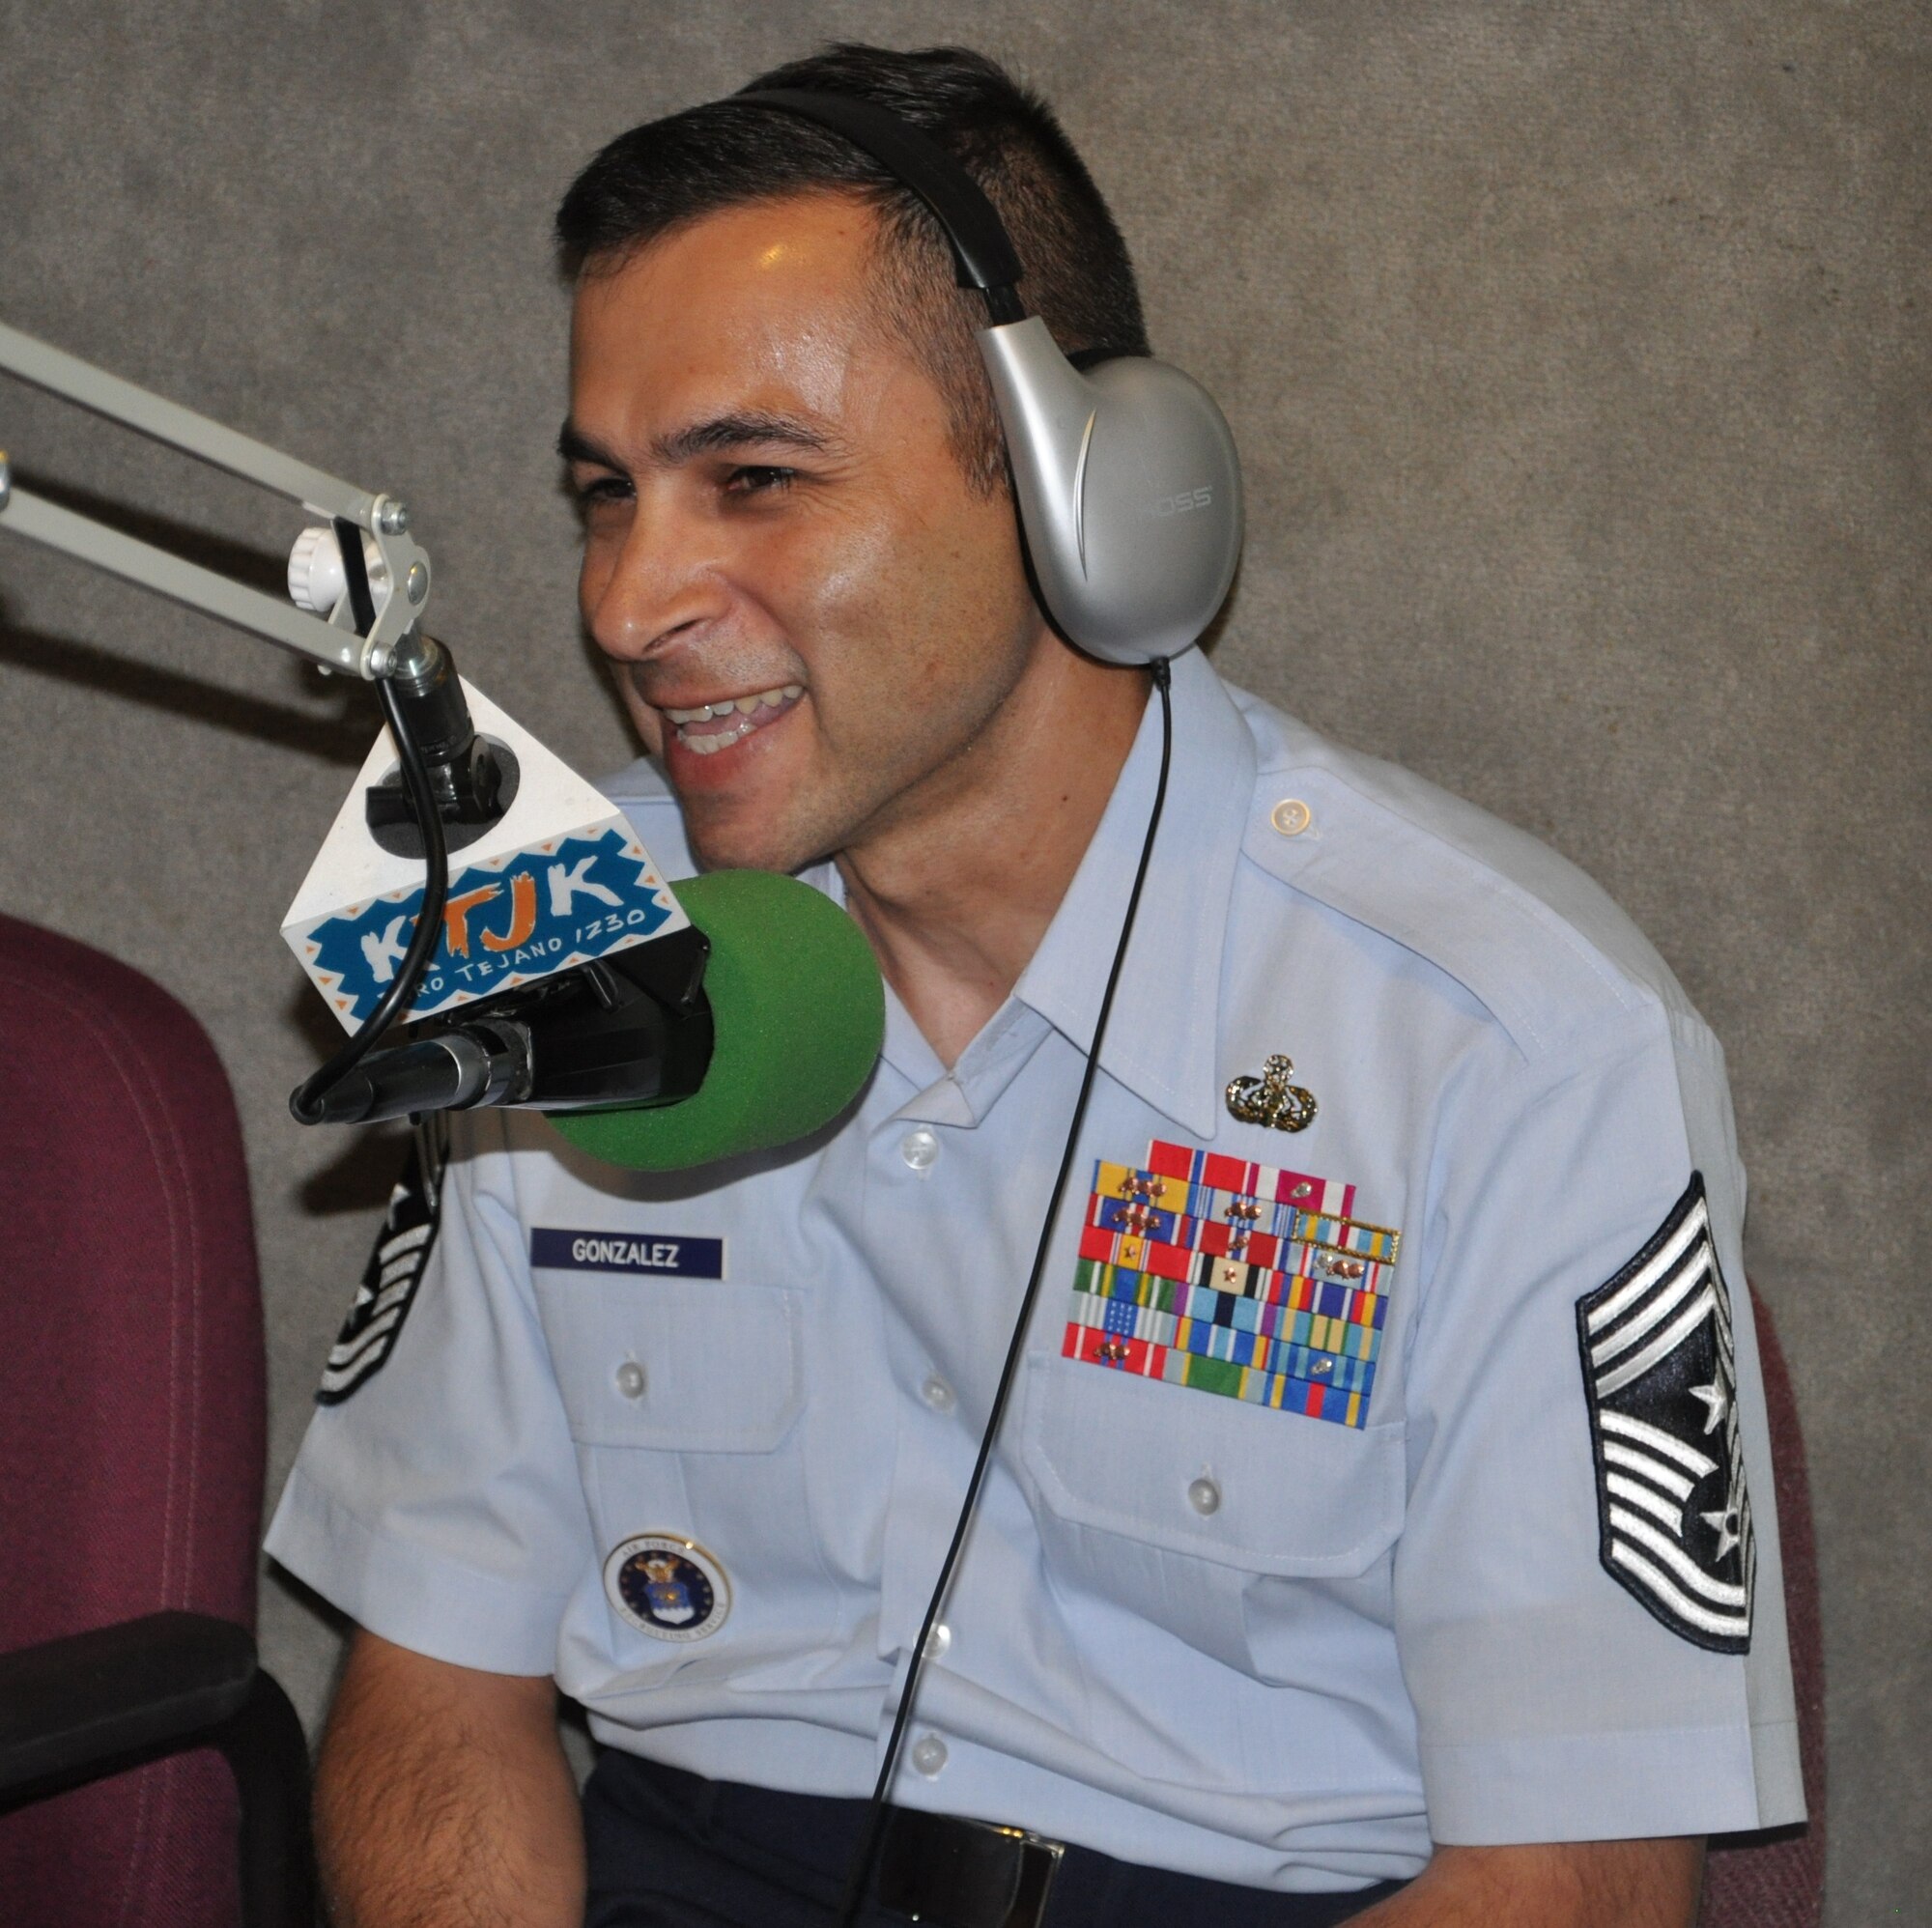 LAUGHLIN AIR FORCE BASE, Texas – Command Chief Master Sgt. Ruben Gonzalez, Air Force Recruiting Service command chief, shares a laugh with Jay Gonzalez of Del Rio’s KTJK during his morning show in Del Rio Aug. 19. Chief Gonzalez, who is from Eagle Pass and was recruited into the Air Force out of Del Rio in 1985, chose to begin his world-wide tour of AF recruiting stations with Del Rio. (U.S. Air Force photo by Airman 1st Class Blake Mize)